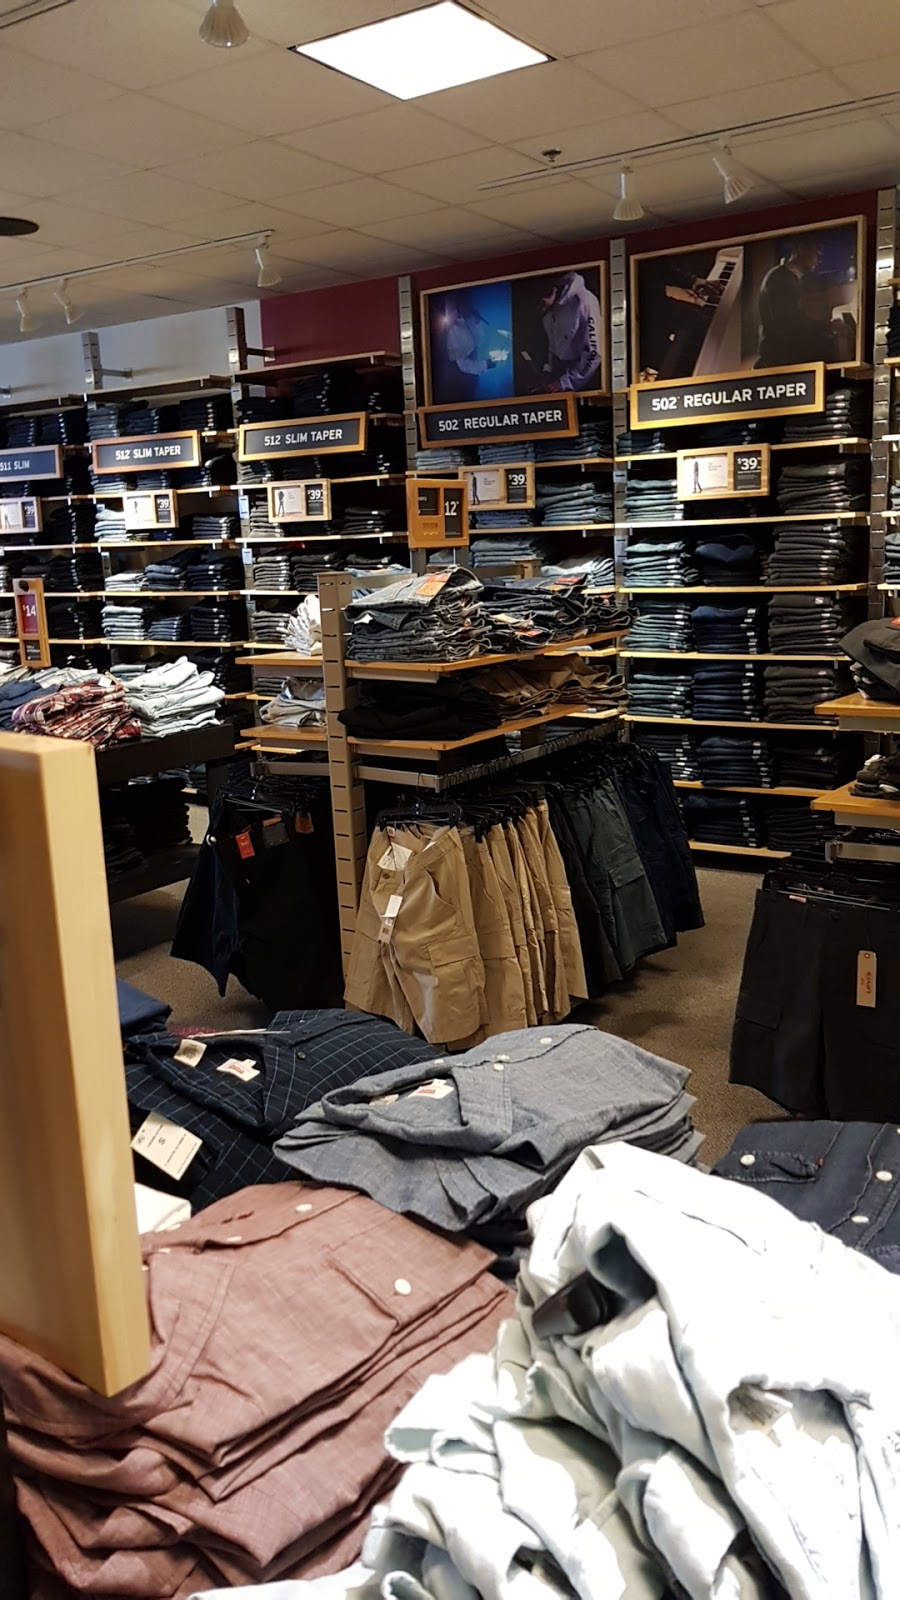 Levis Outlet Store | 301 Tanger Dr Suite 107, Terrell, TX 75160, USA | Phone: (972) 563-6887